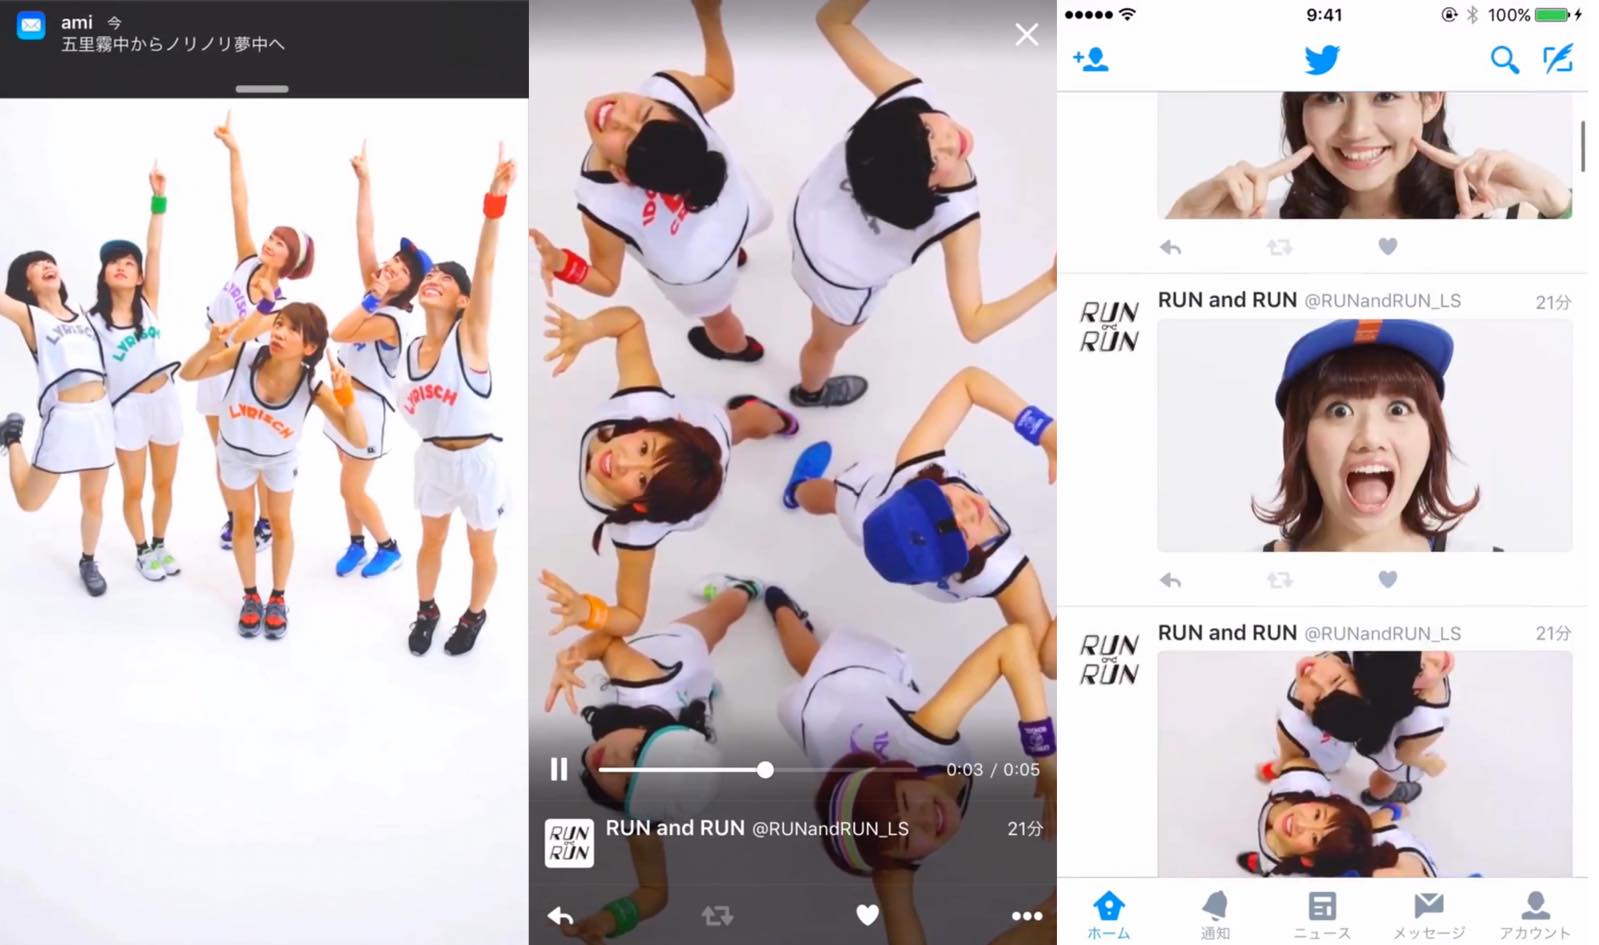 lyrical school in the Palm of Your Hand! Innovative Smartphone MV for Major Debut Single “RUN and RUN” Released!